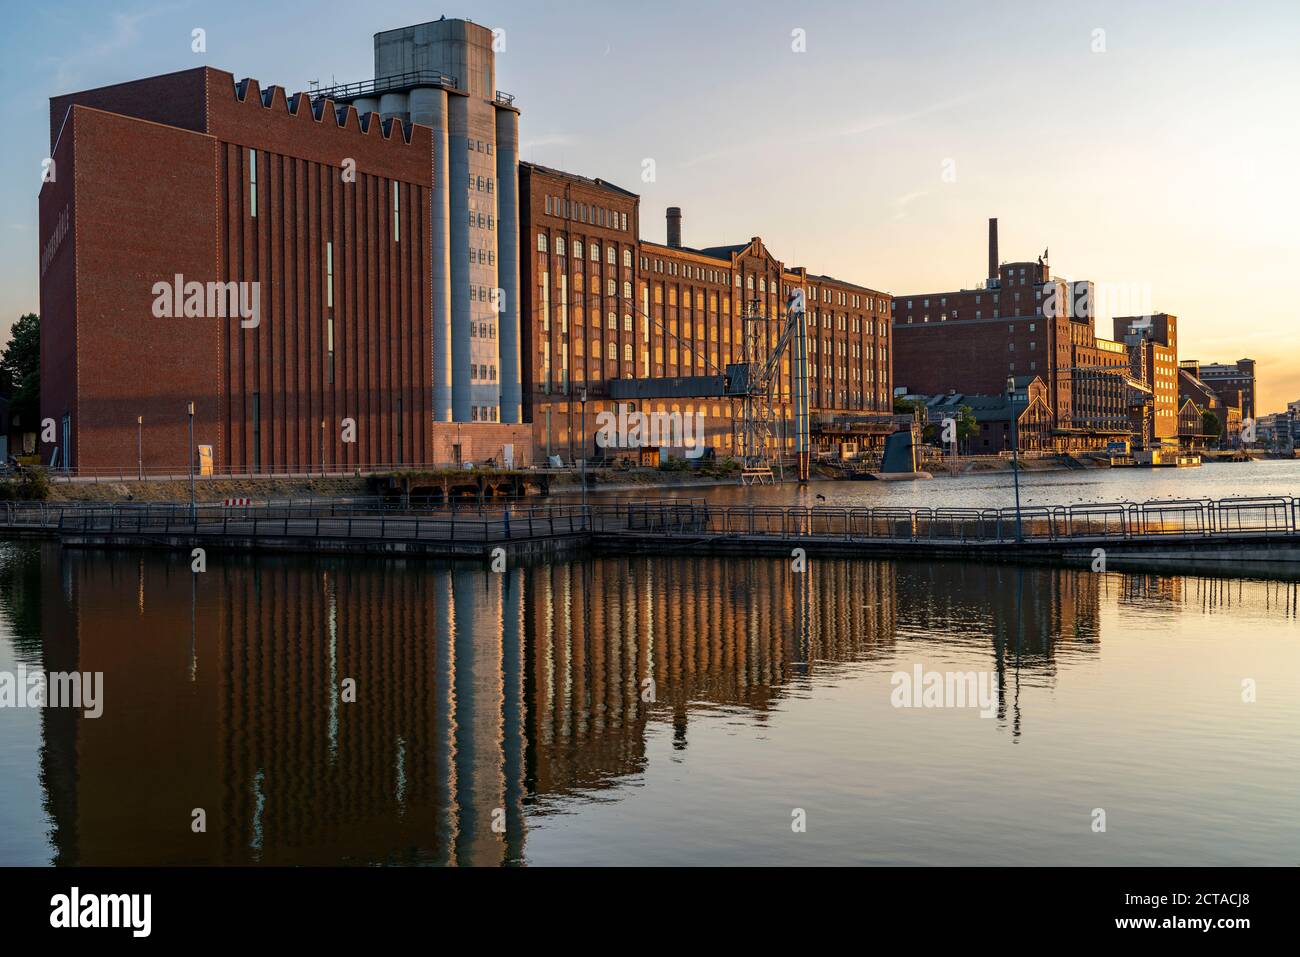 The Inner Harbor, a historic inland port, in Duisburg, Building Küppersmühle, MKM Museum Küppersmühle for Modern Art, and Werhahn-Mühle former Mill, G Stock Photo